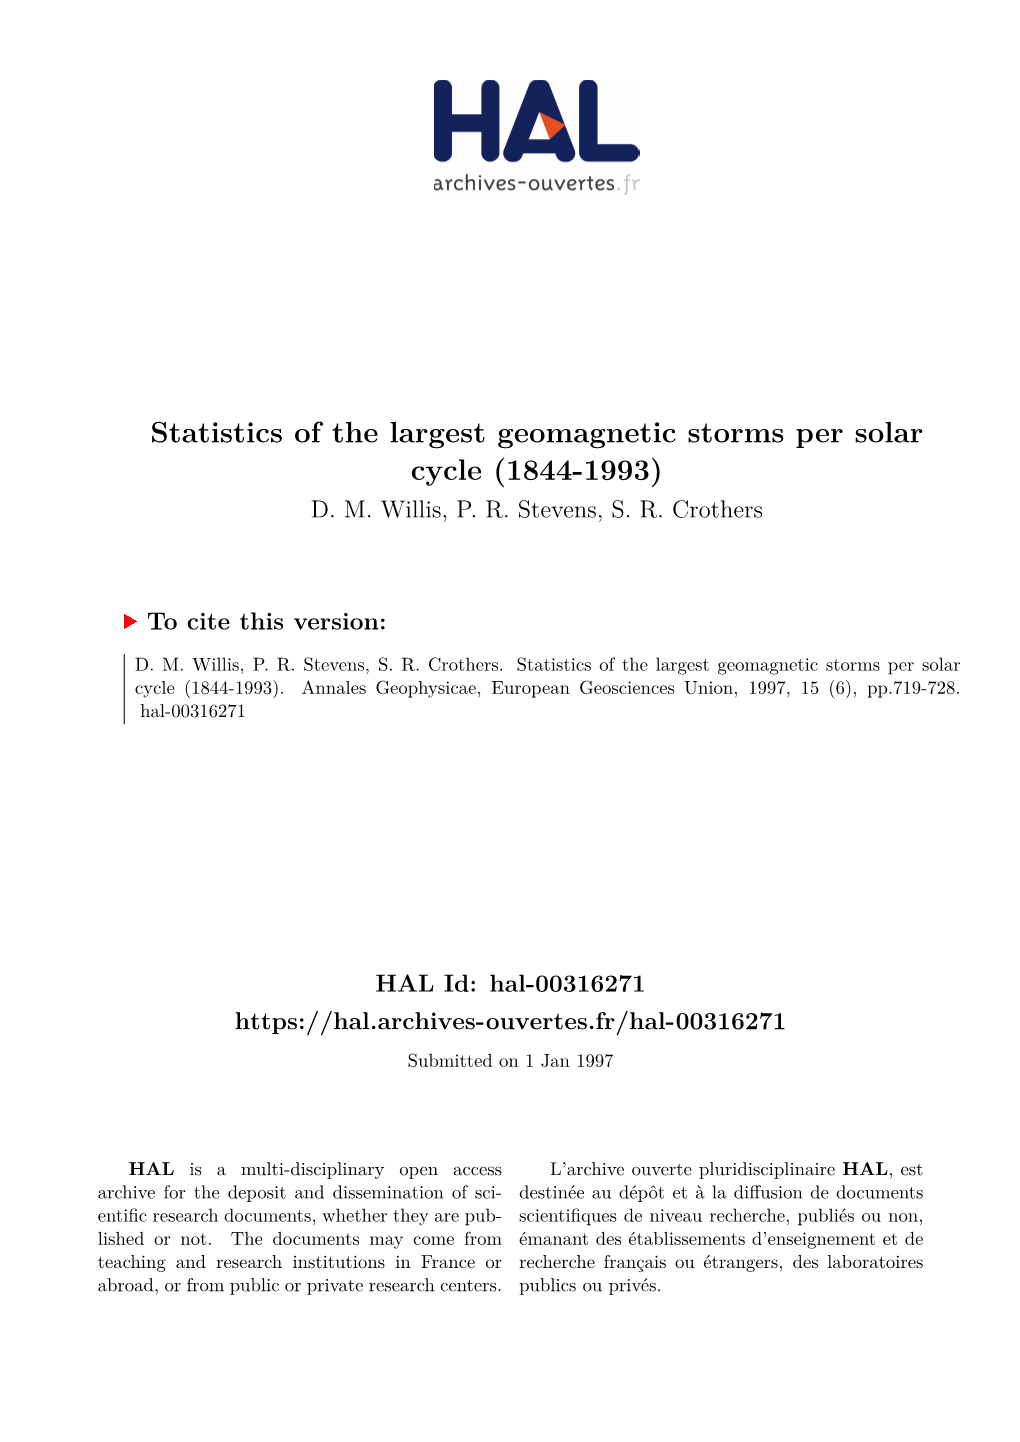 Statistics of the Largest Geomagnetic Storms Per Solar Cycle (1844-1993) D